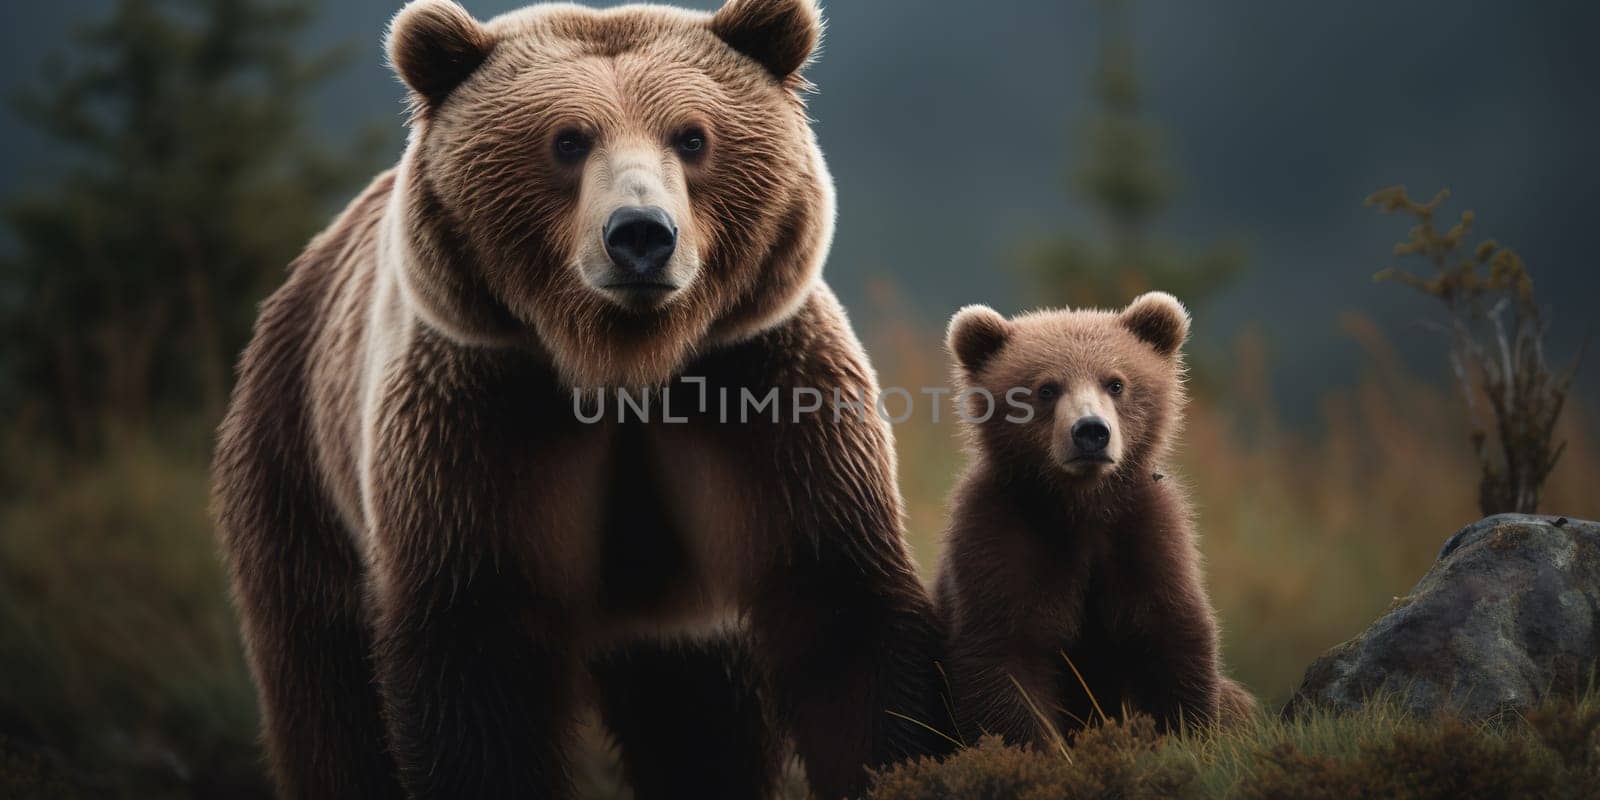 Grizzly bear with baby looking in camera in the forest by tan4ikk1